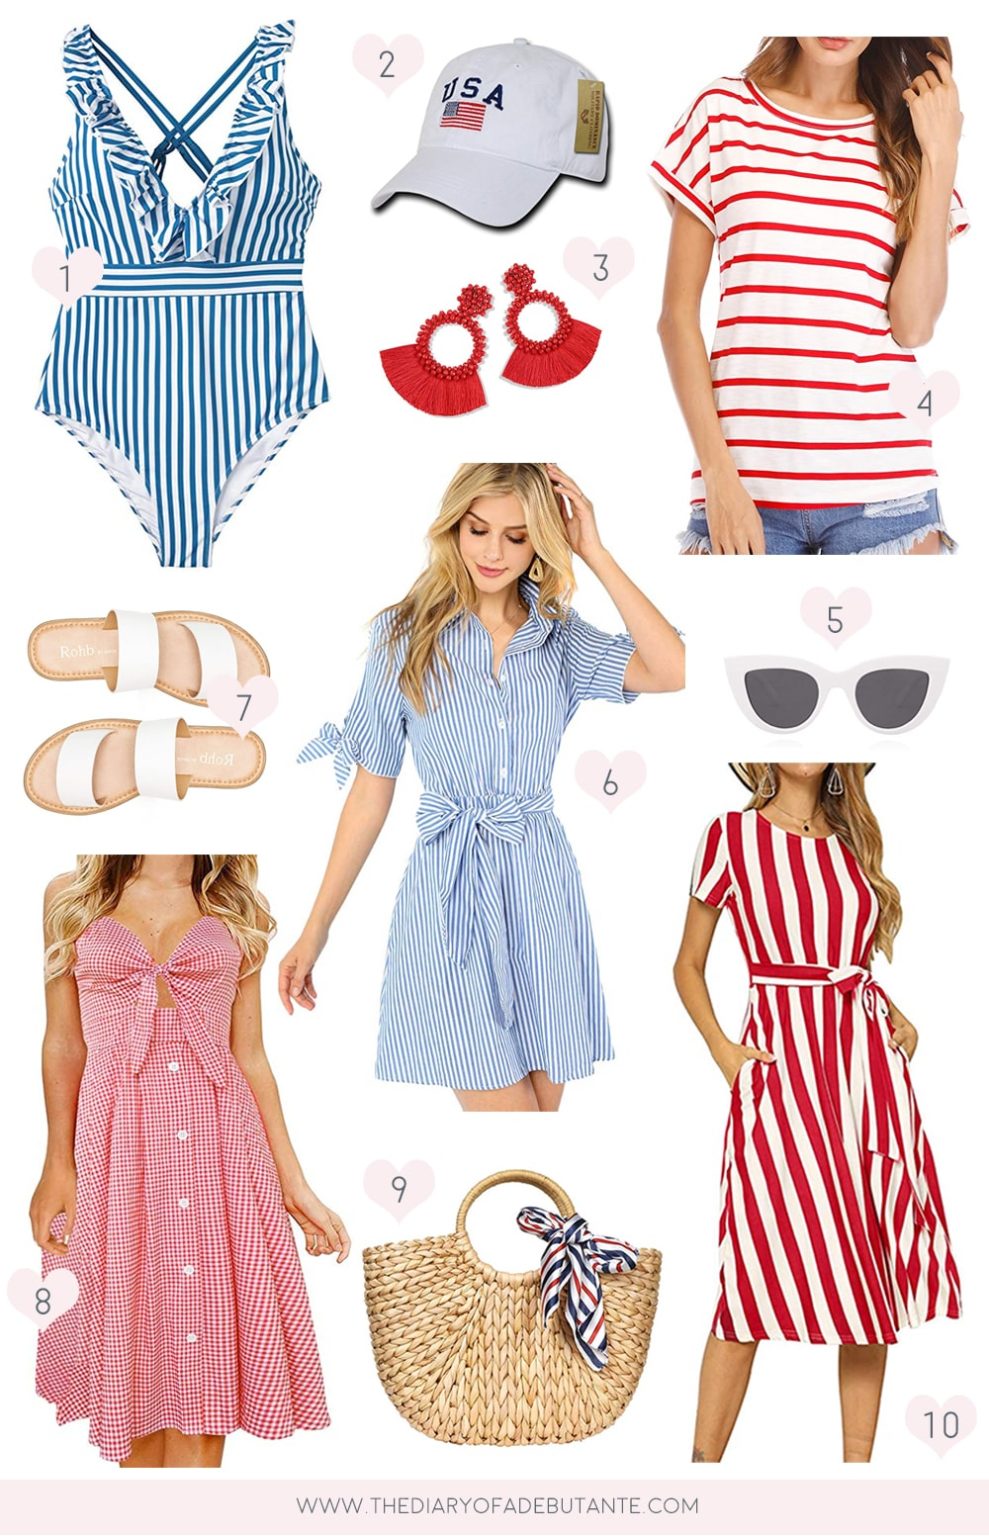 Amazon Fashion Finds: 4th of July Style Picks under $50